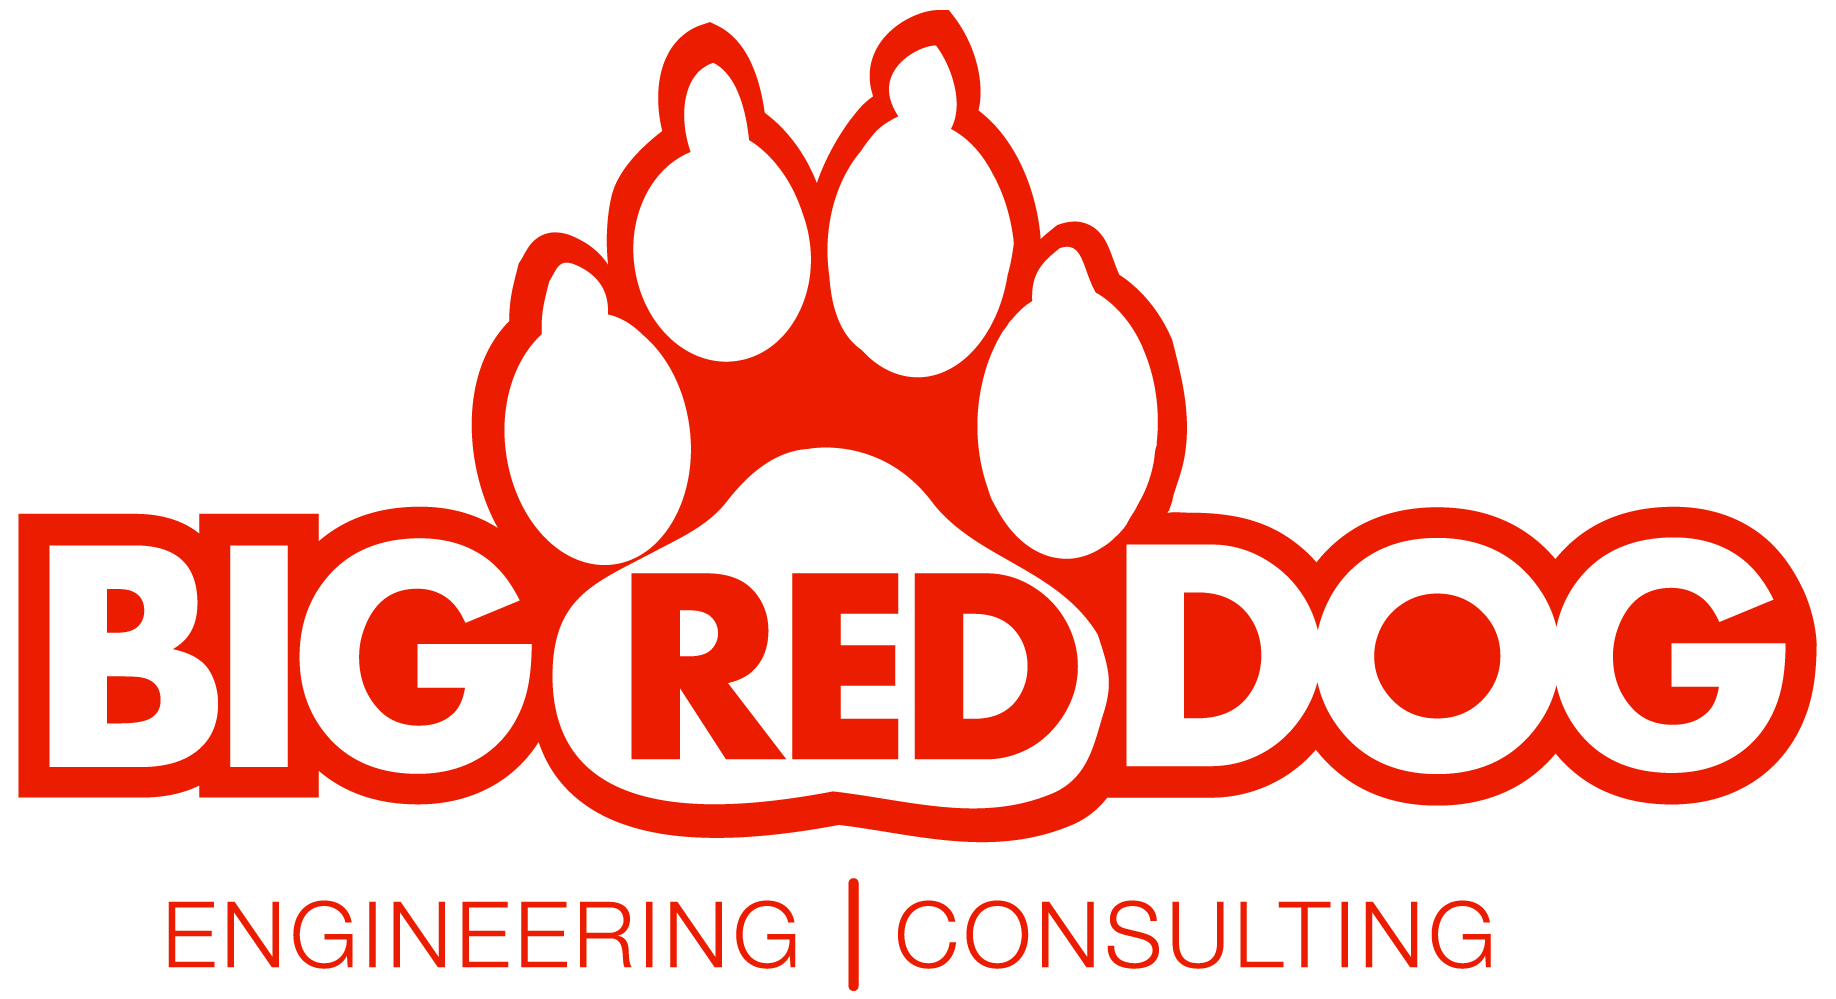 Big Red Oval Logo - Big Red Dog Competitors, Revenue and Employees - Owler Company Profile